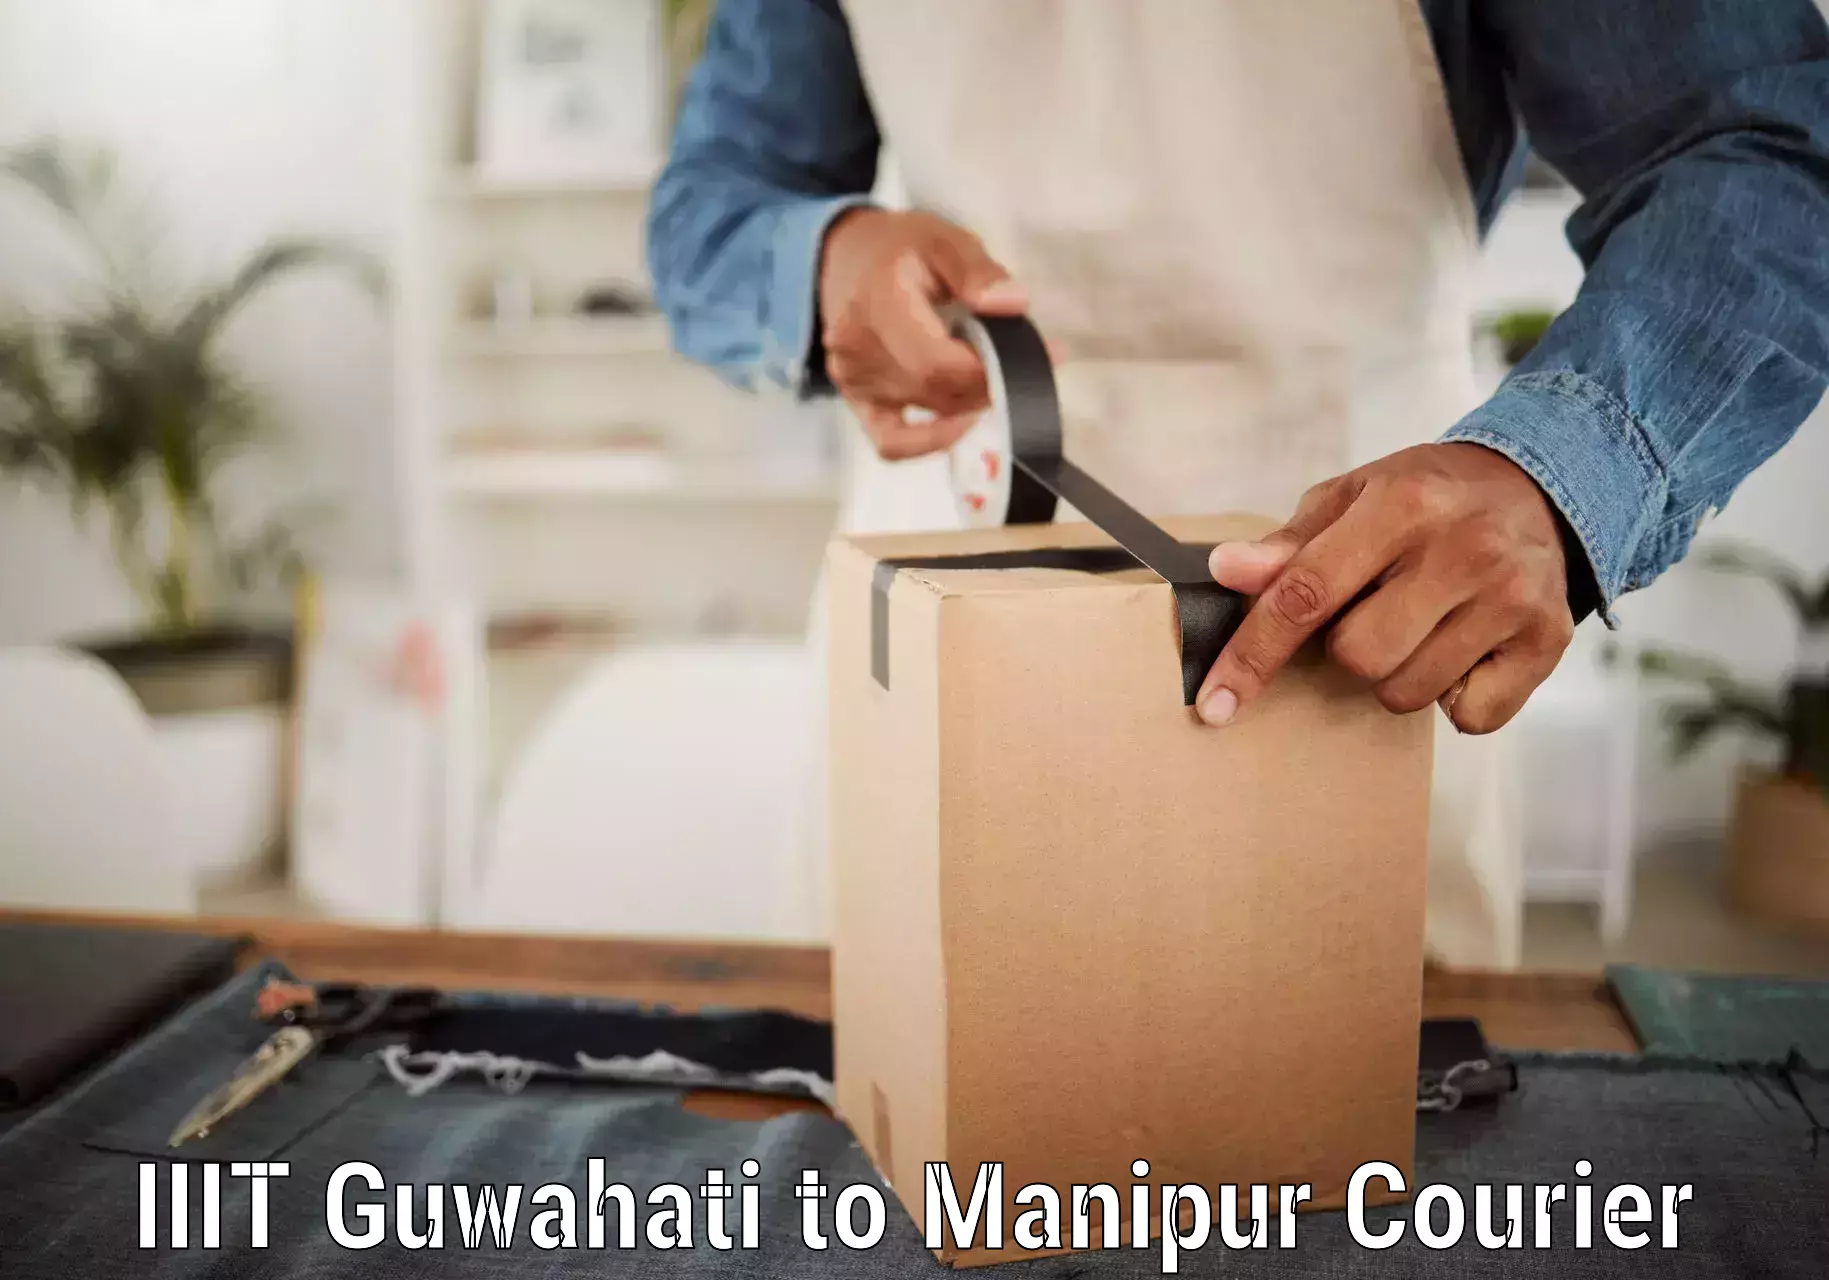 Next-generation courier services IIIT Guwahati to Imphal